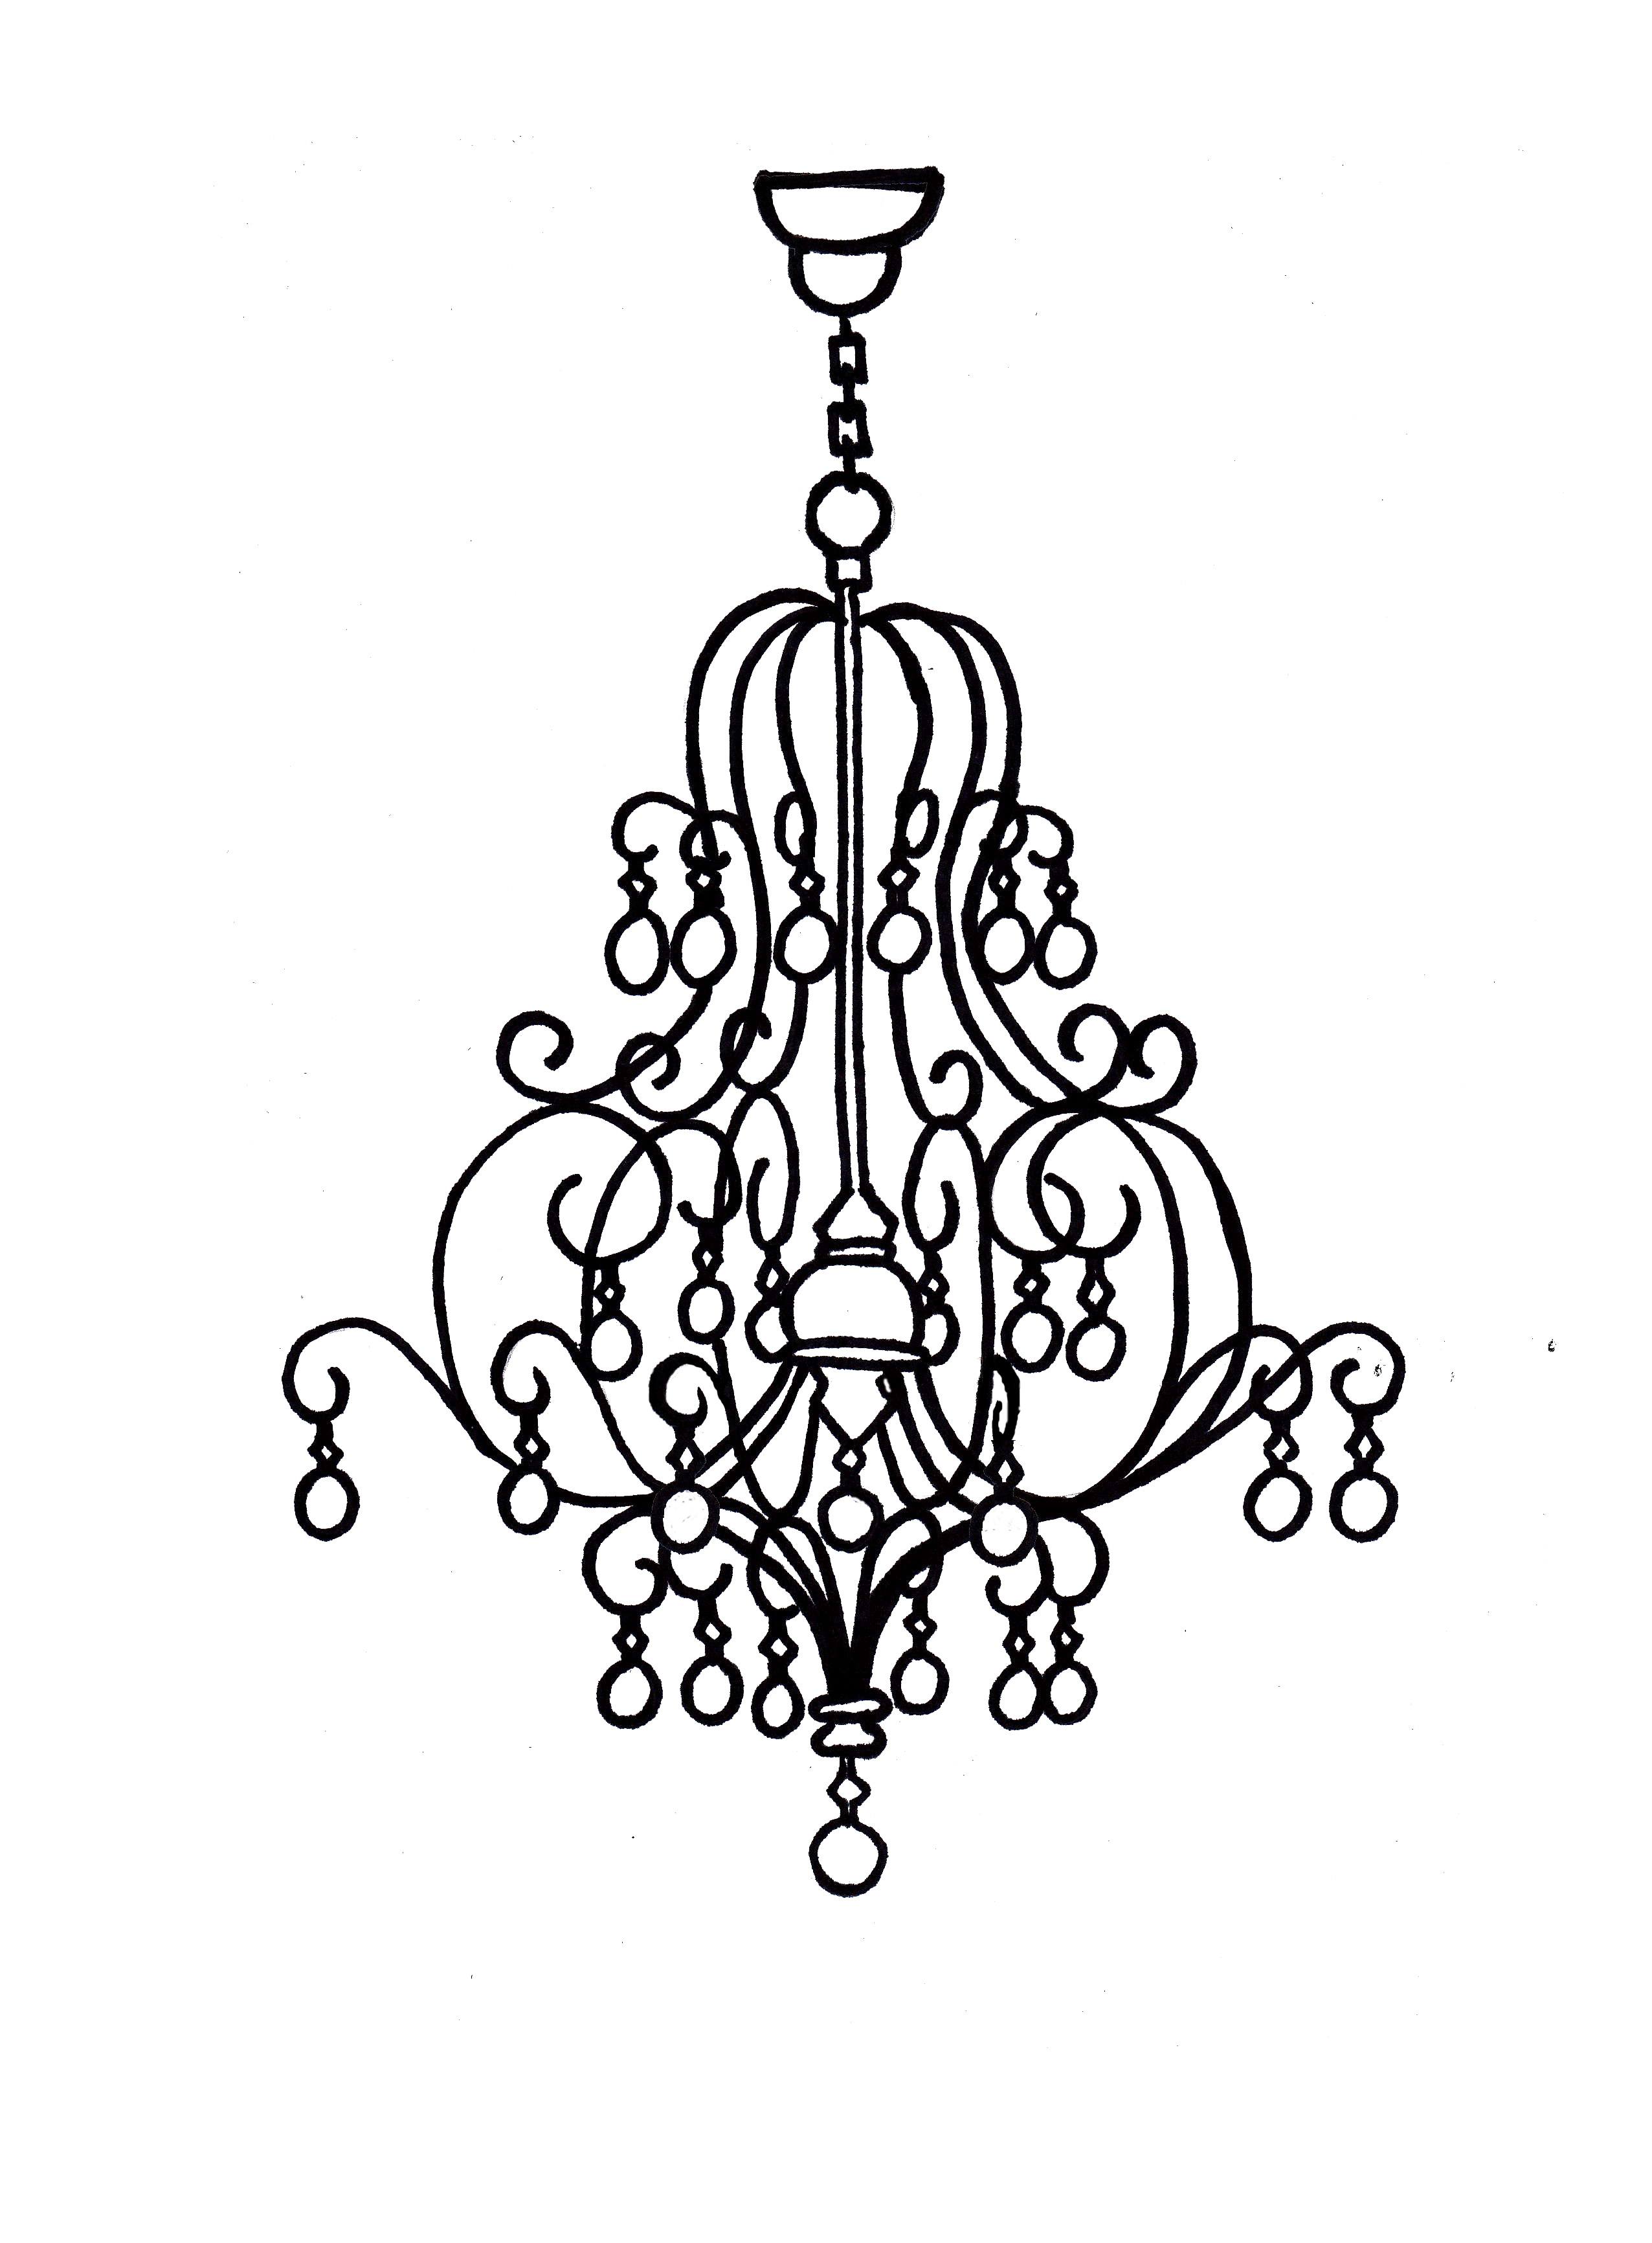 Interior design line drawing of a chandelier